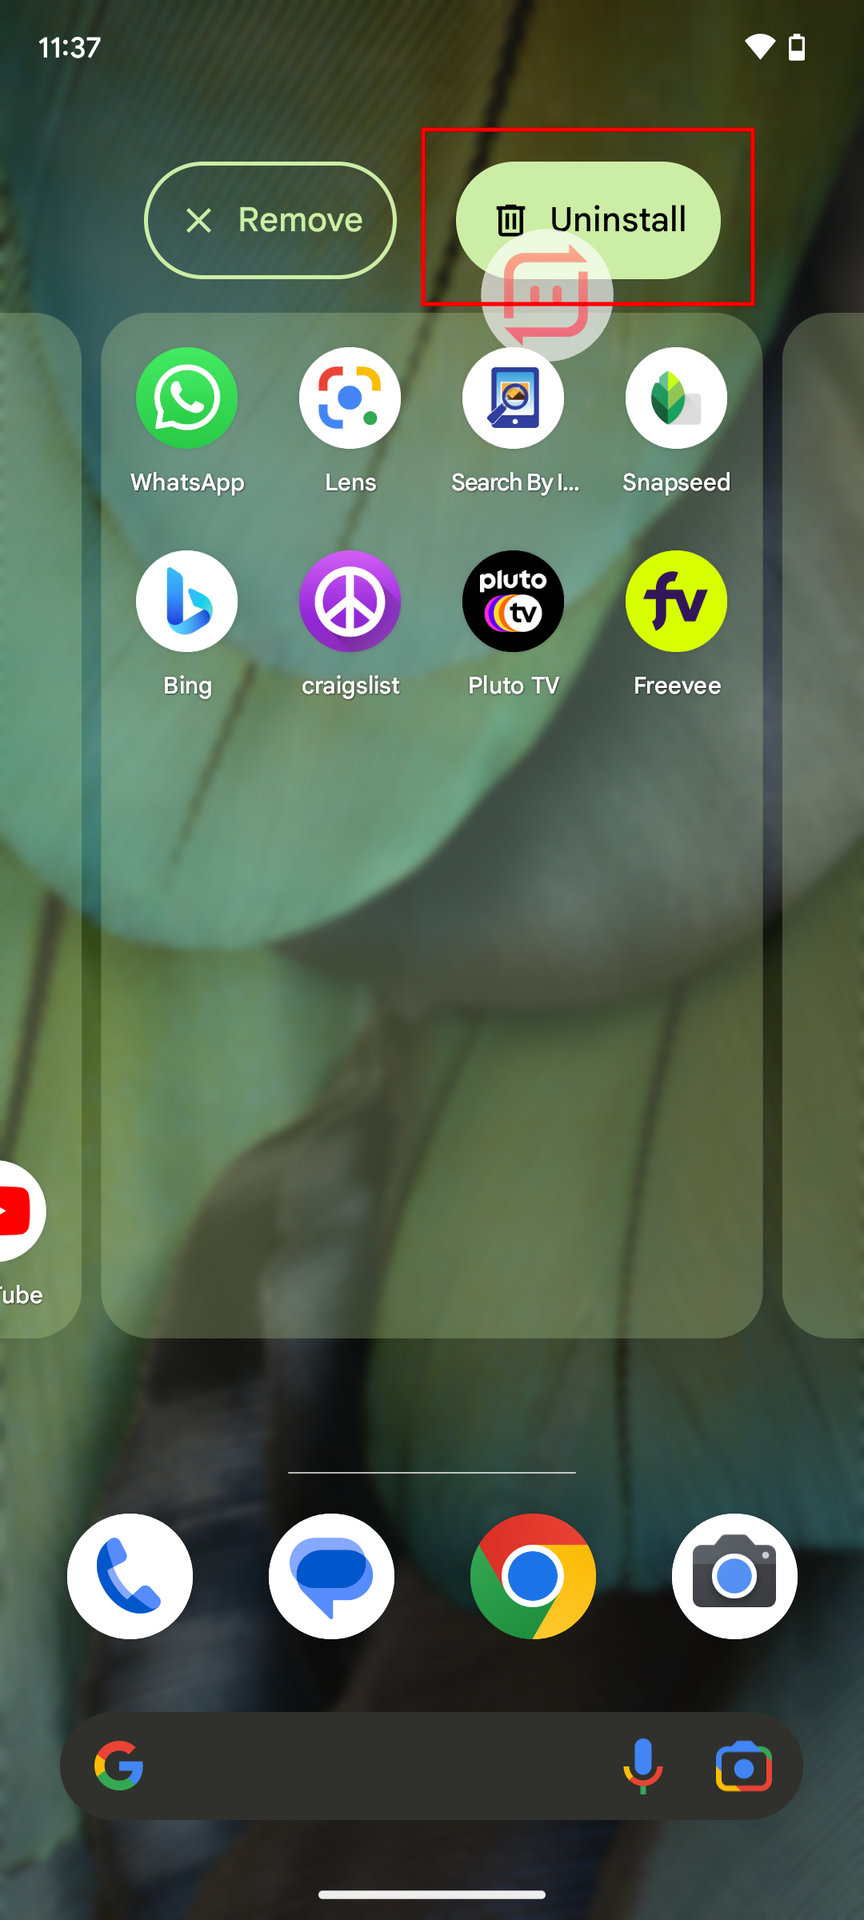 How to uninstall apps from the home screen 2